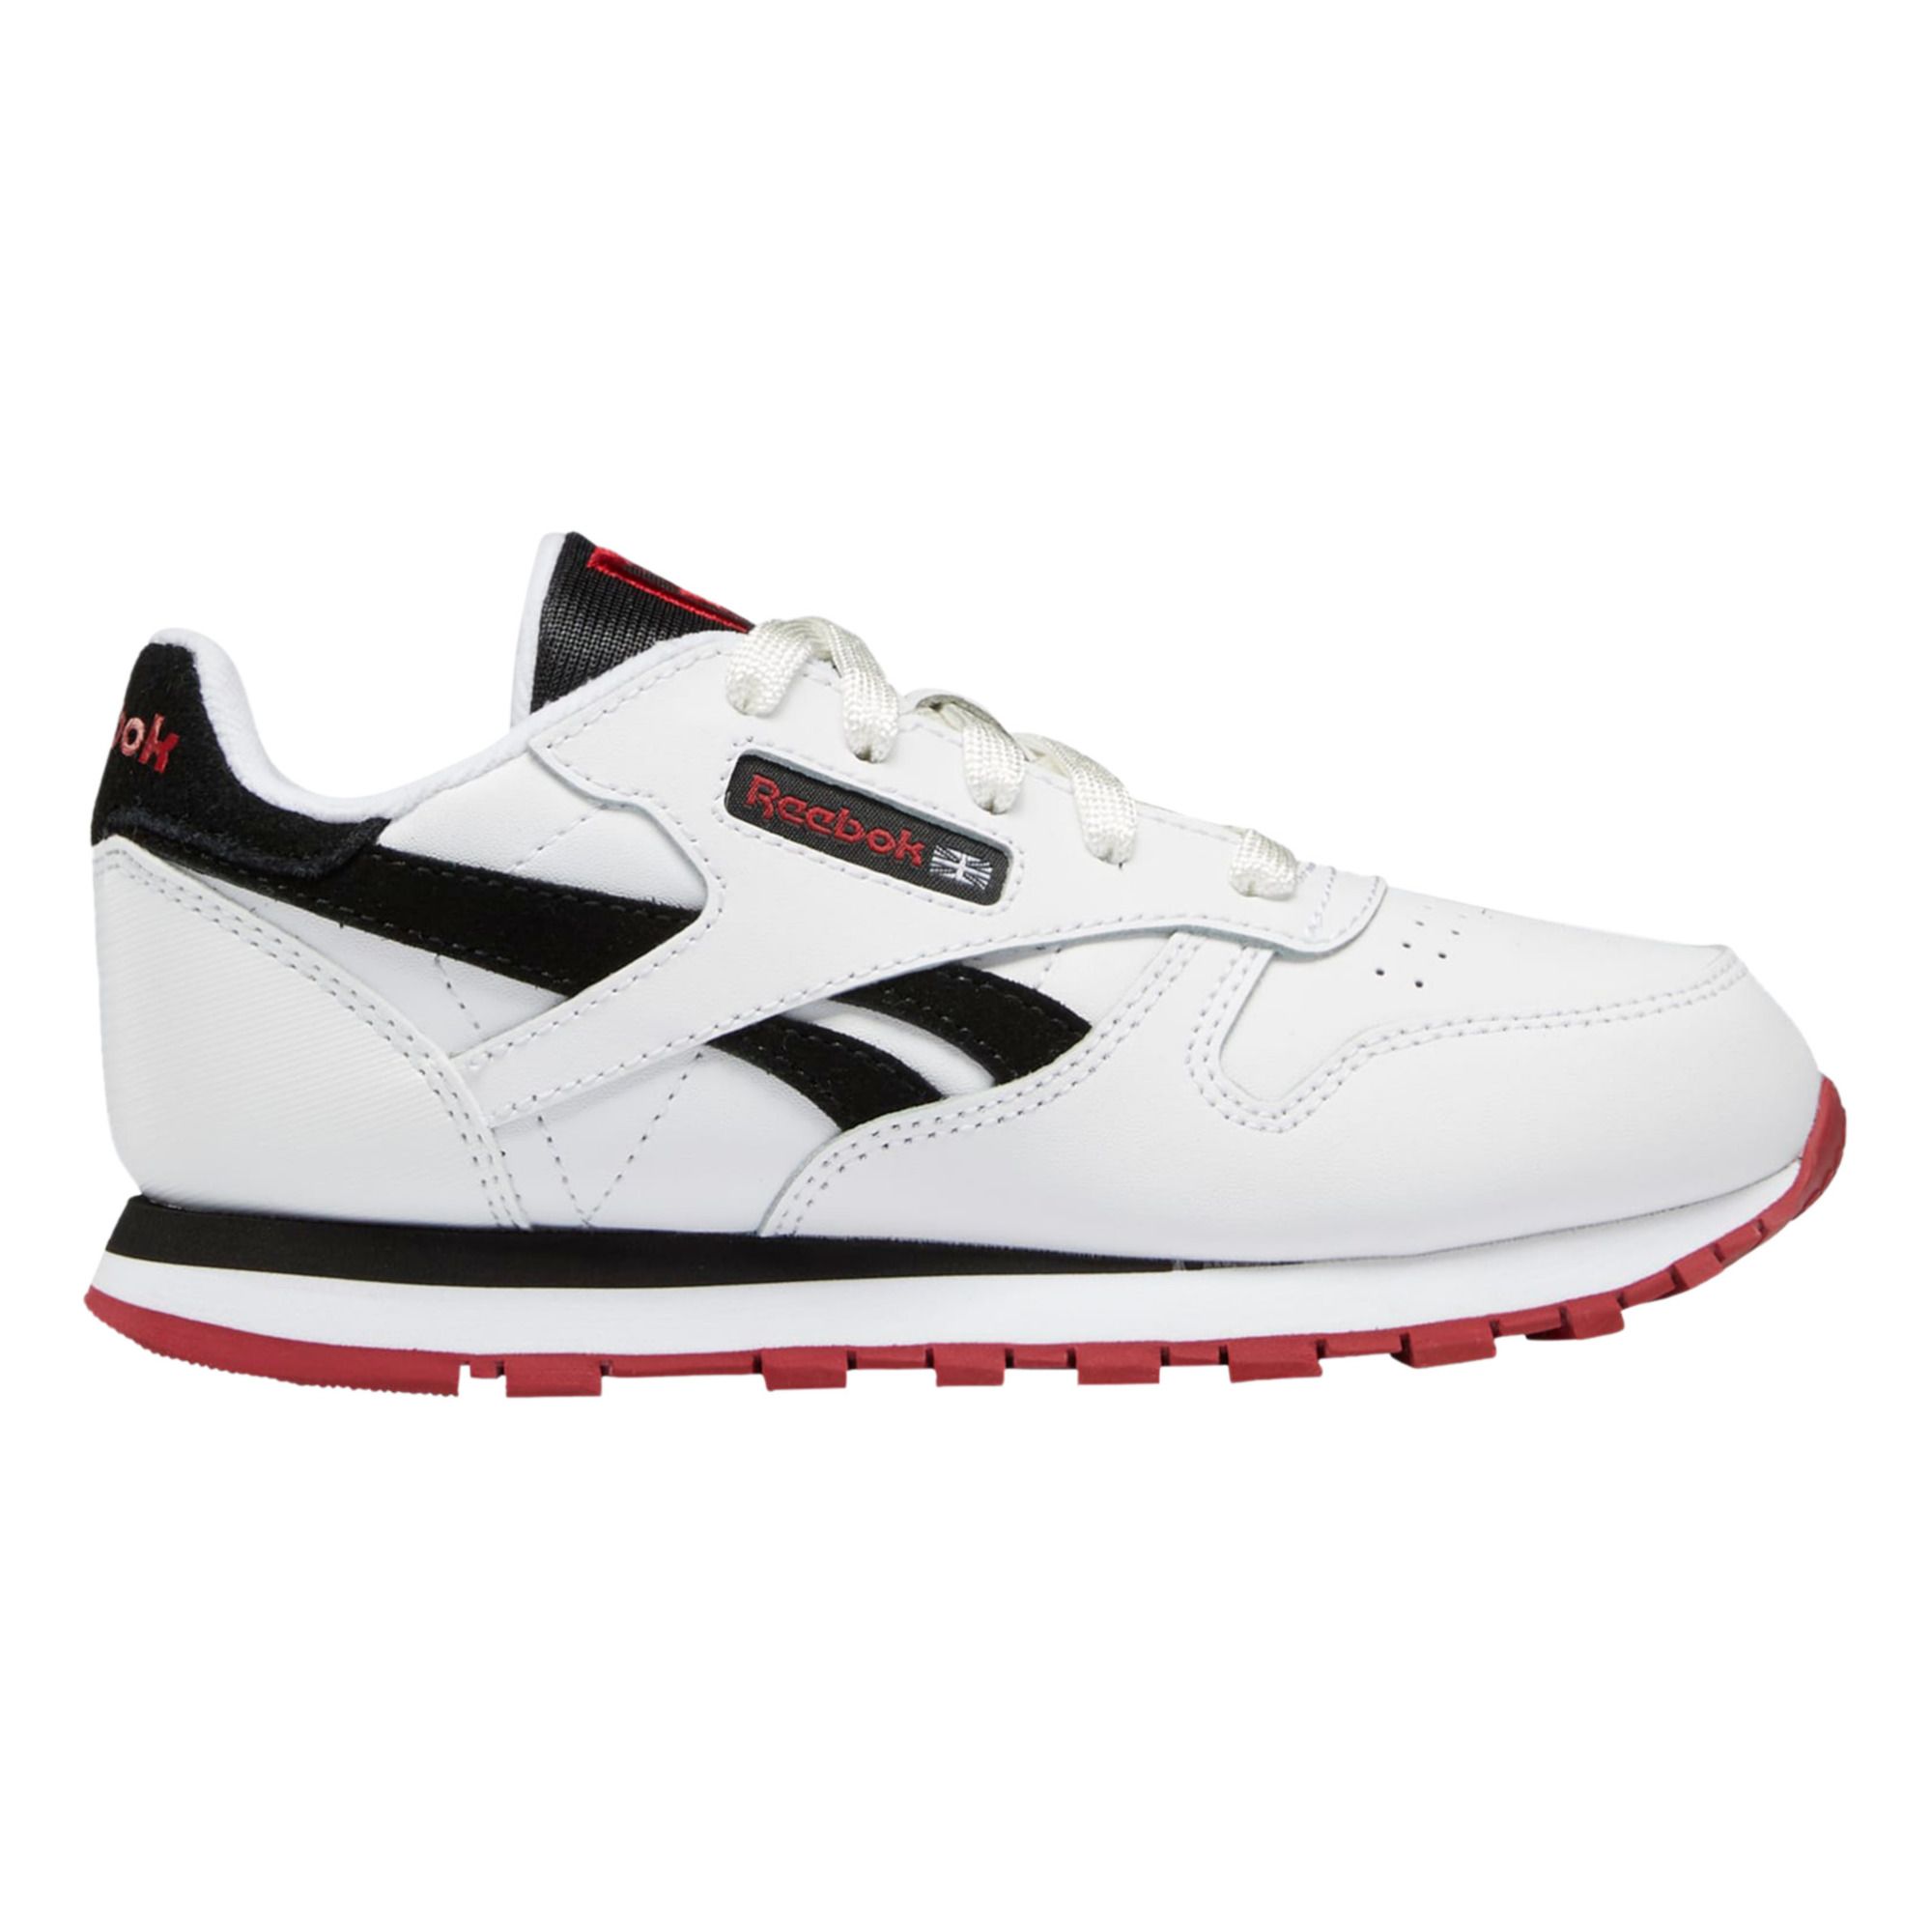 Reebok - Baskets Lacets Classic Leather - Fille - Blanc